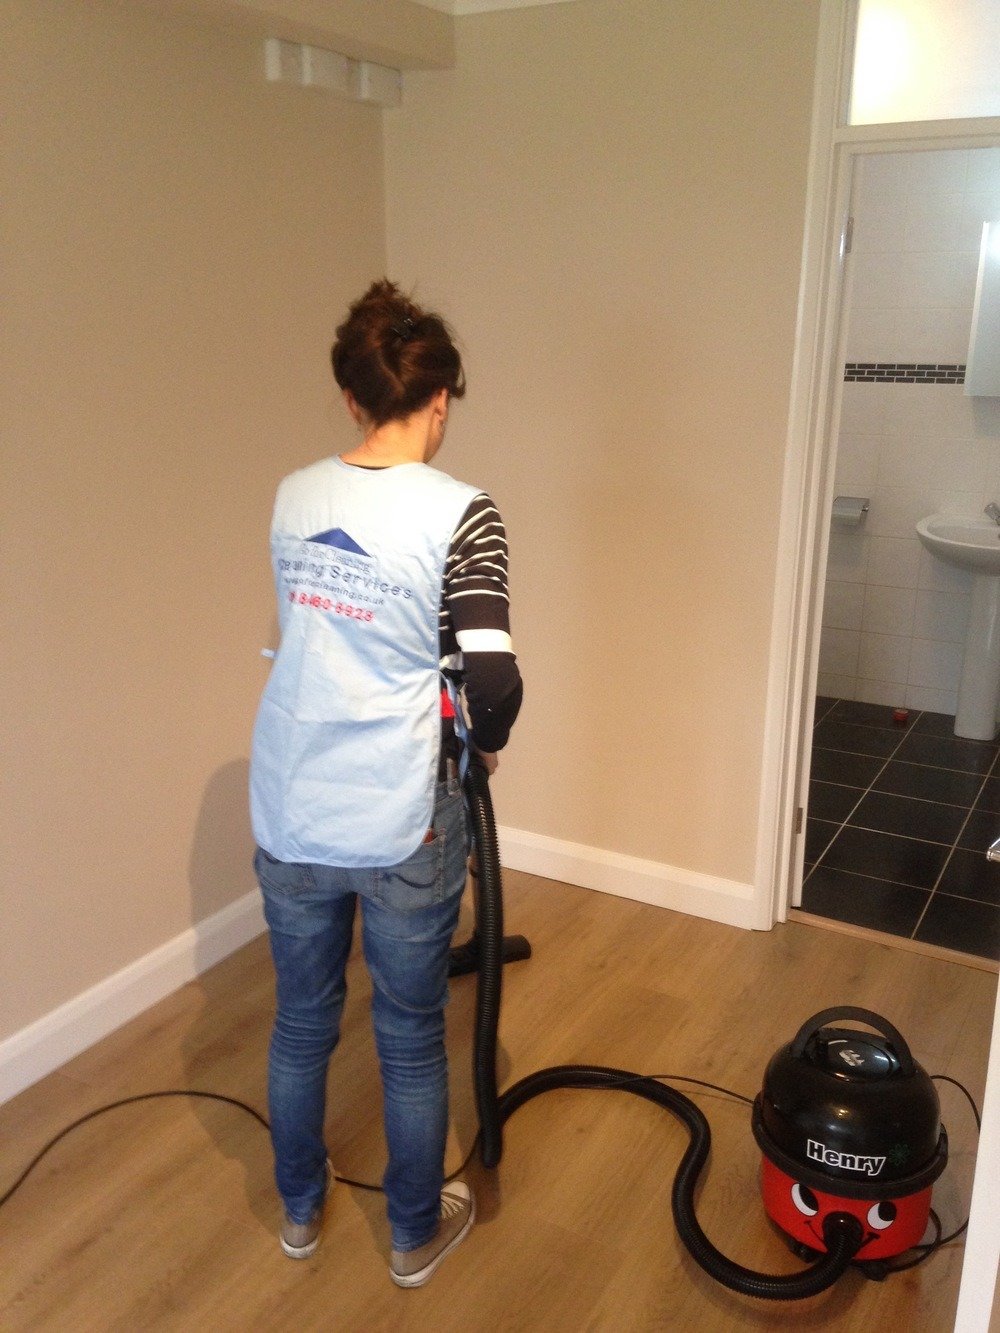 The Standing of Qualified End of Tenancy Cleaning for your Cleaning Need